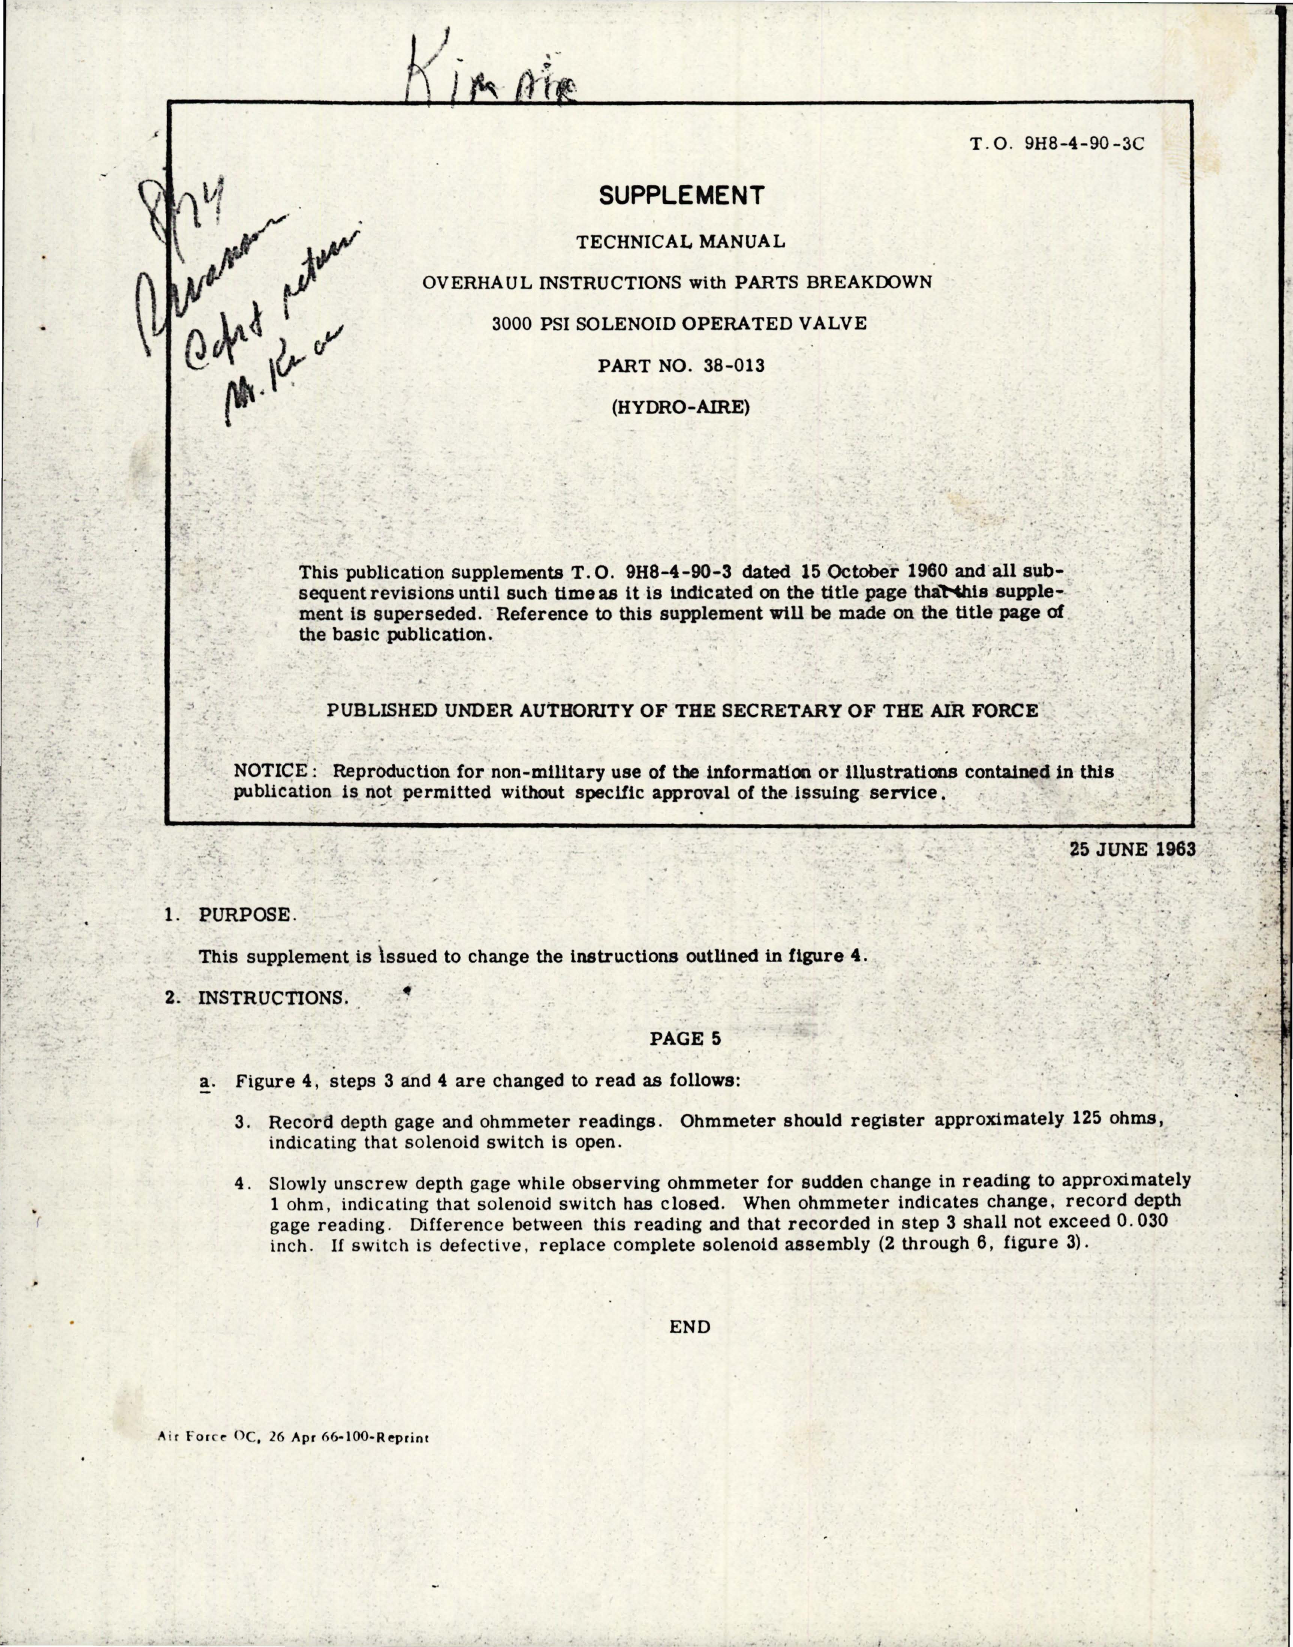 Sample page 1 from AirCorps Library document: Supplement to Overhaul Instructions with Parts Breakdown for 3000 PSI Solenoid Operated Valve - Part 38-013 